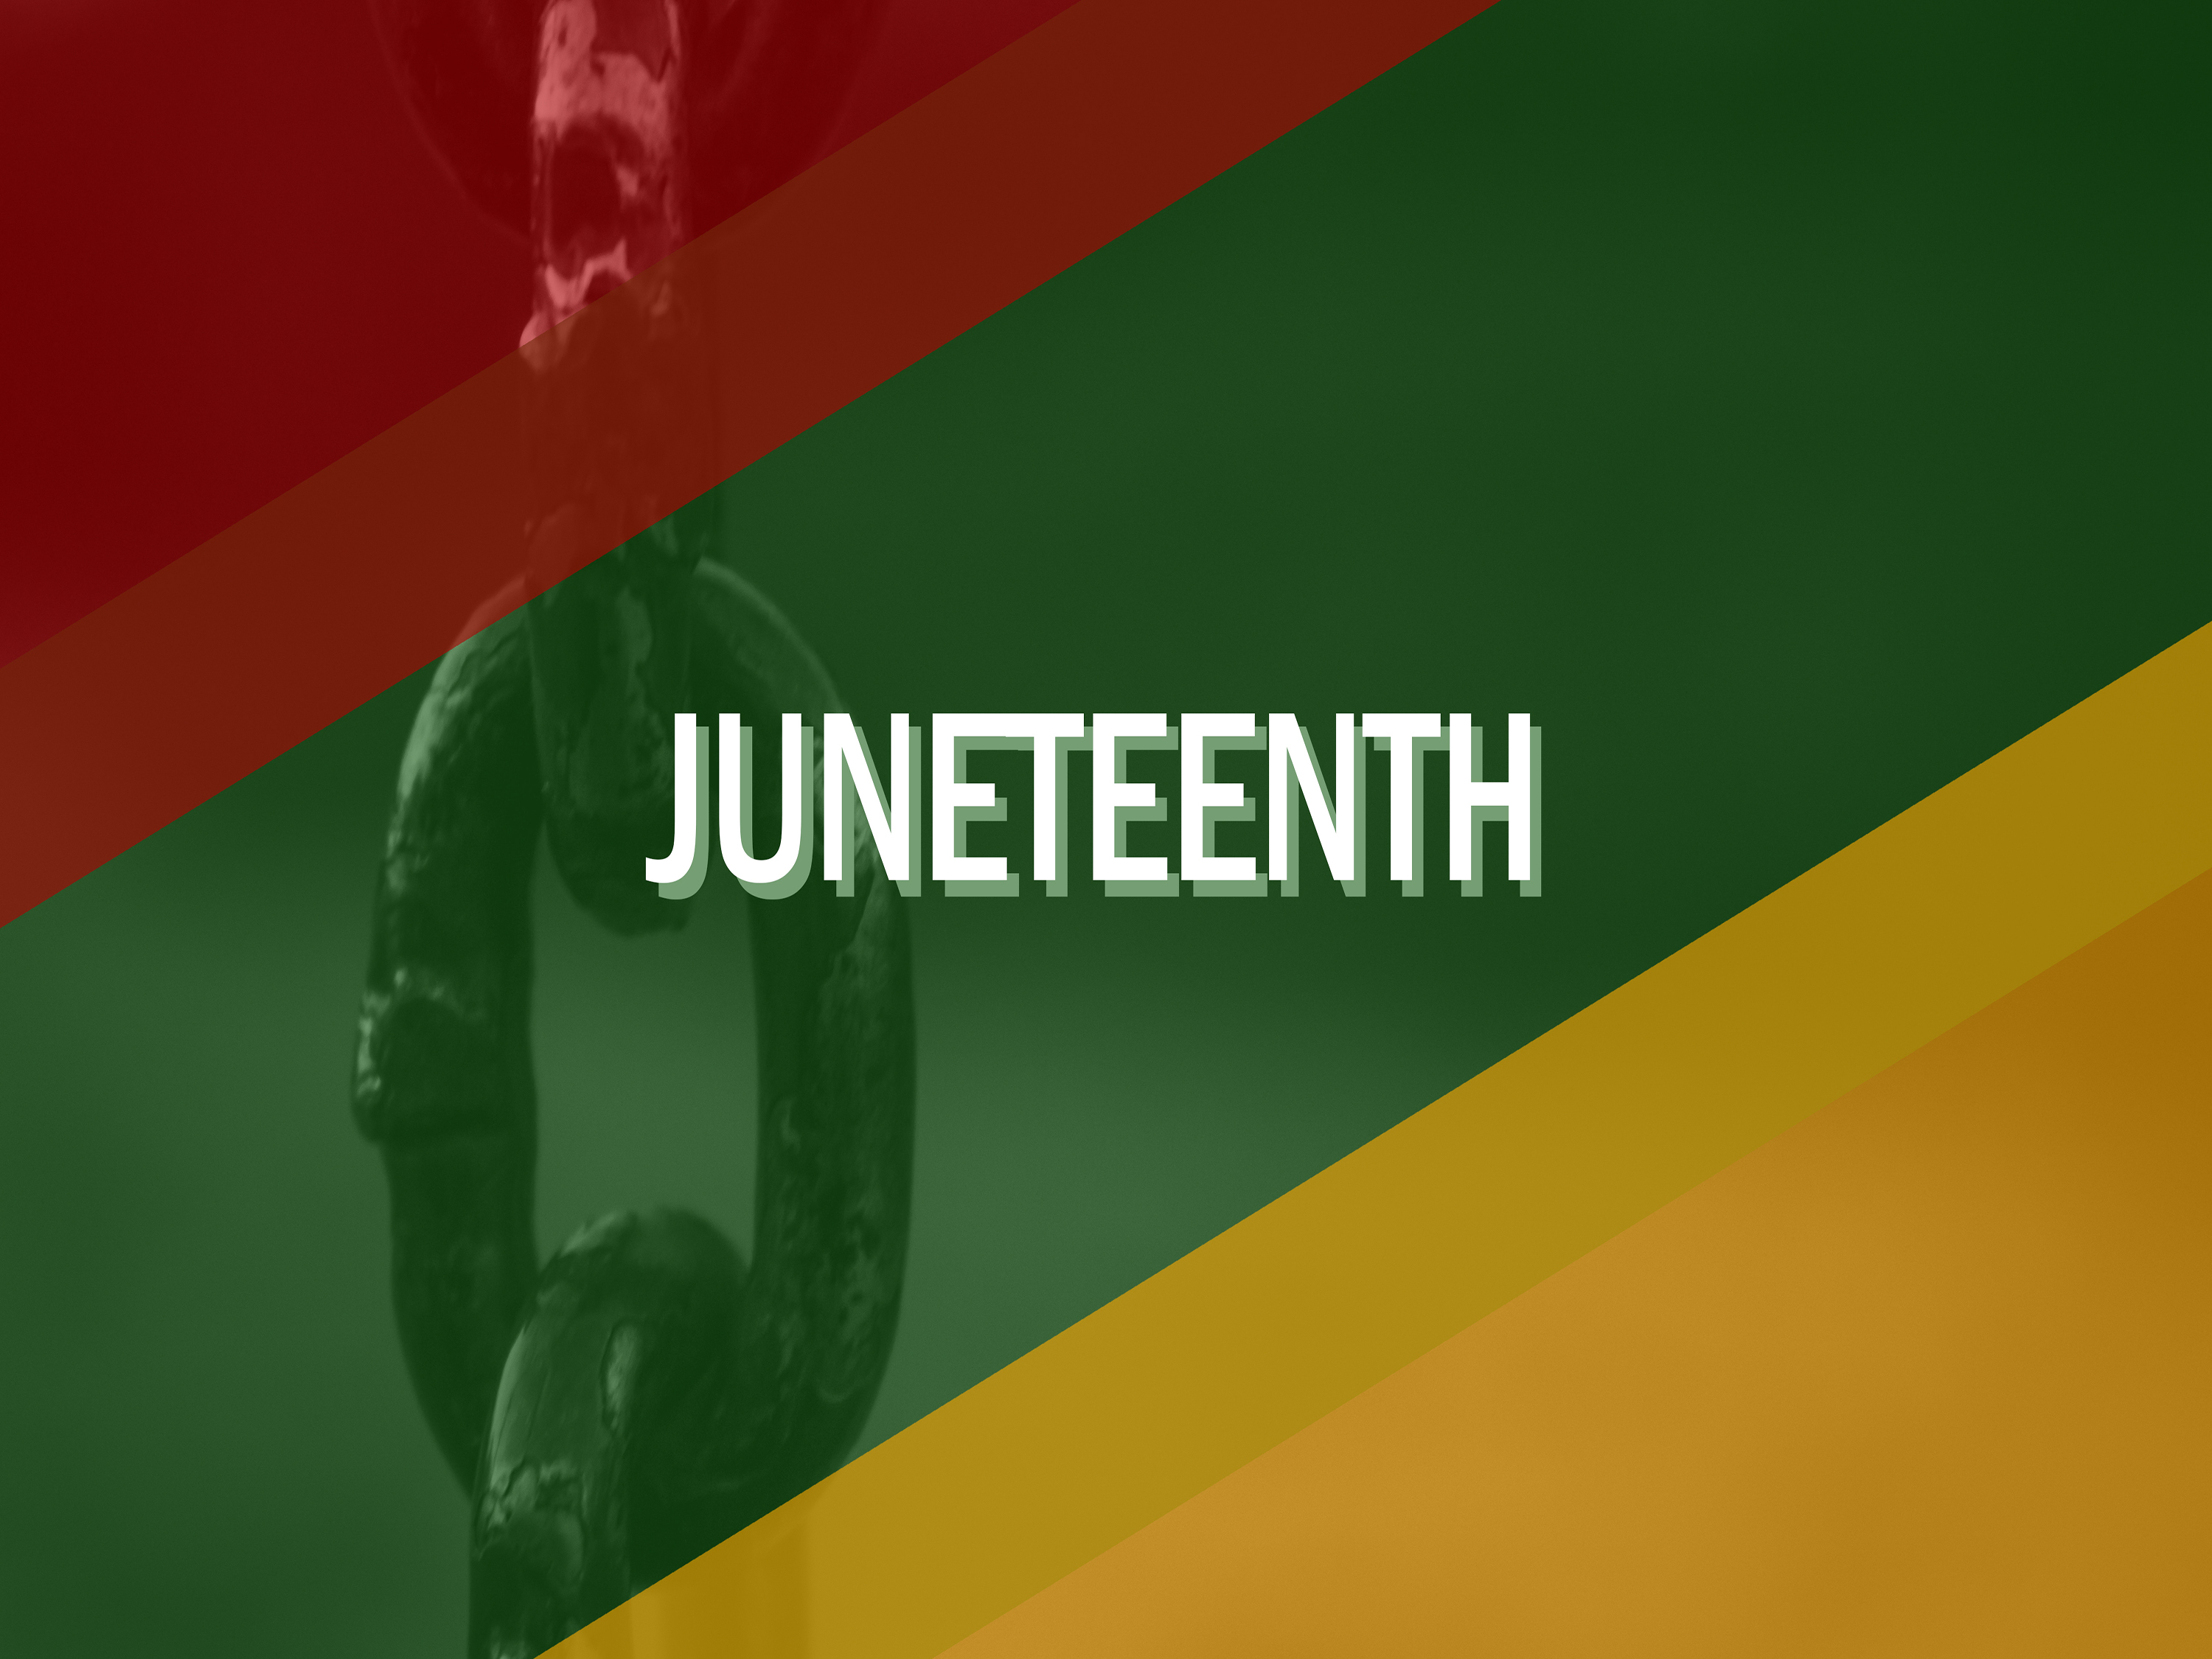 Juneteenth Graphic. Juneteenth (a combination of the words 鈥淛une鈥� and 鈥渘ineteenth鈥�) is the day that federal troops came to Galveston, Texas on June 19, 1865 and made sure that enslaved people in the area were set free. This was two-and-one-half years after Lincoln signed the Emancipation Proclamation. 